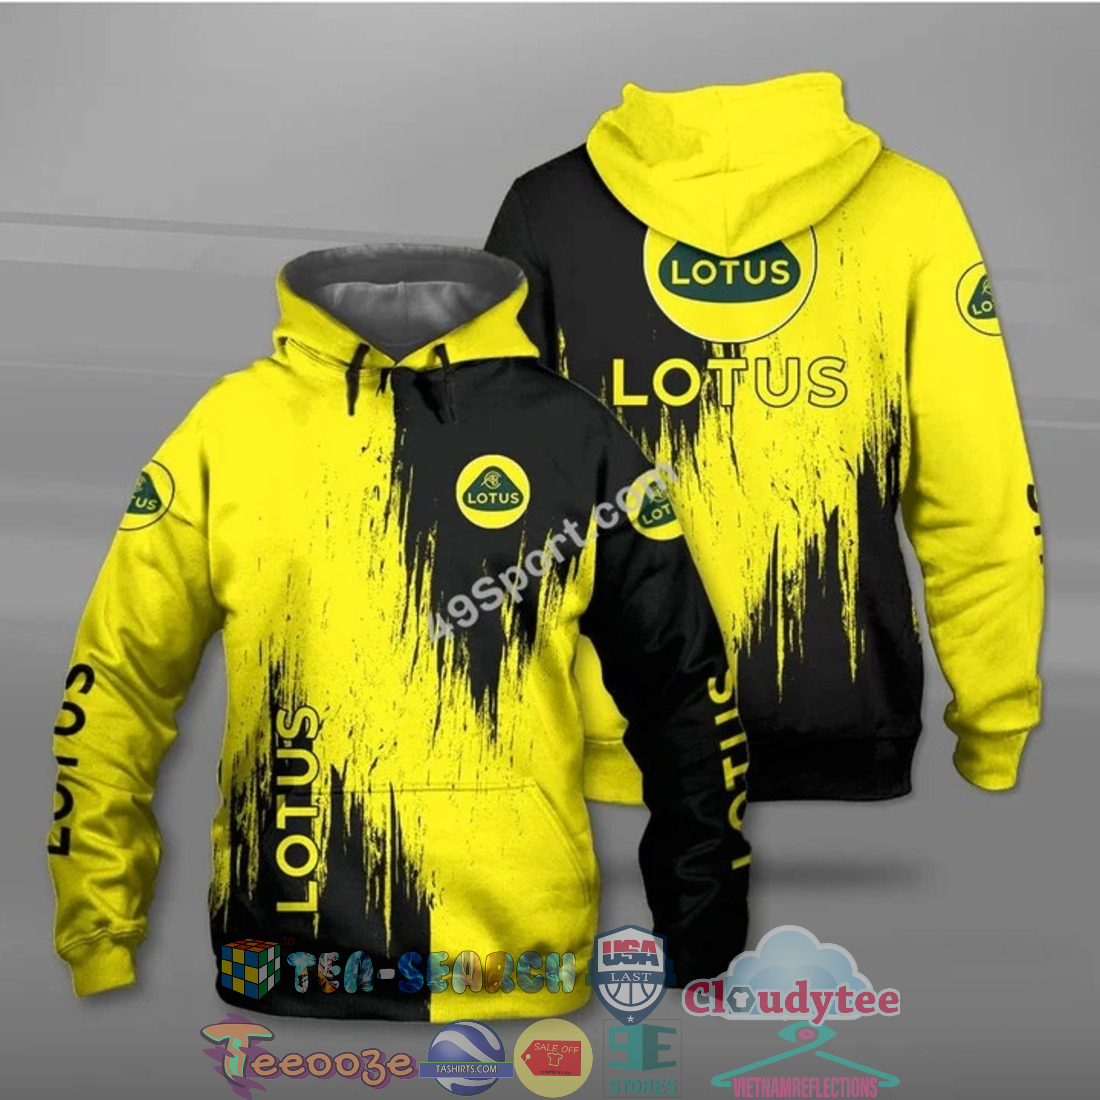 Lotus Cars all over printed t-shirt hoodie